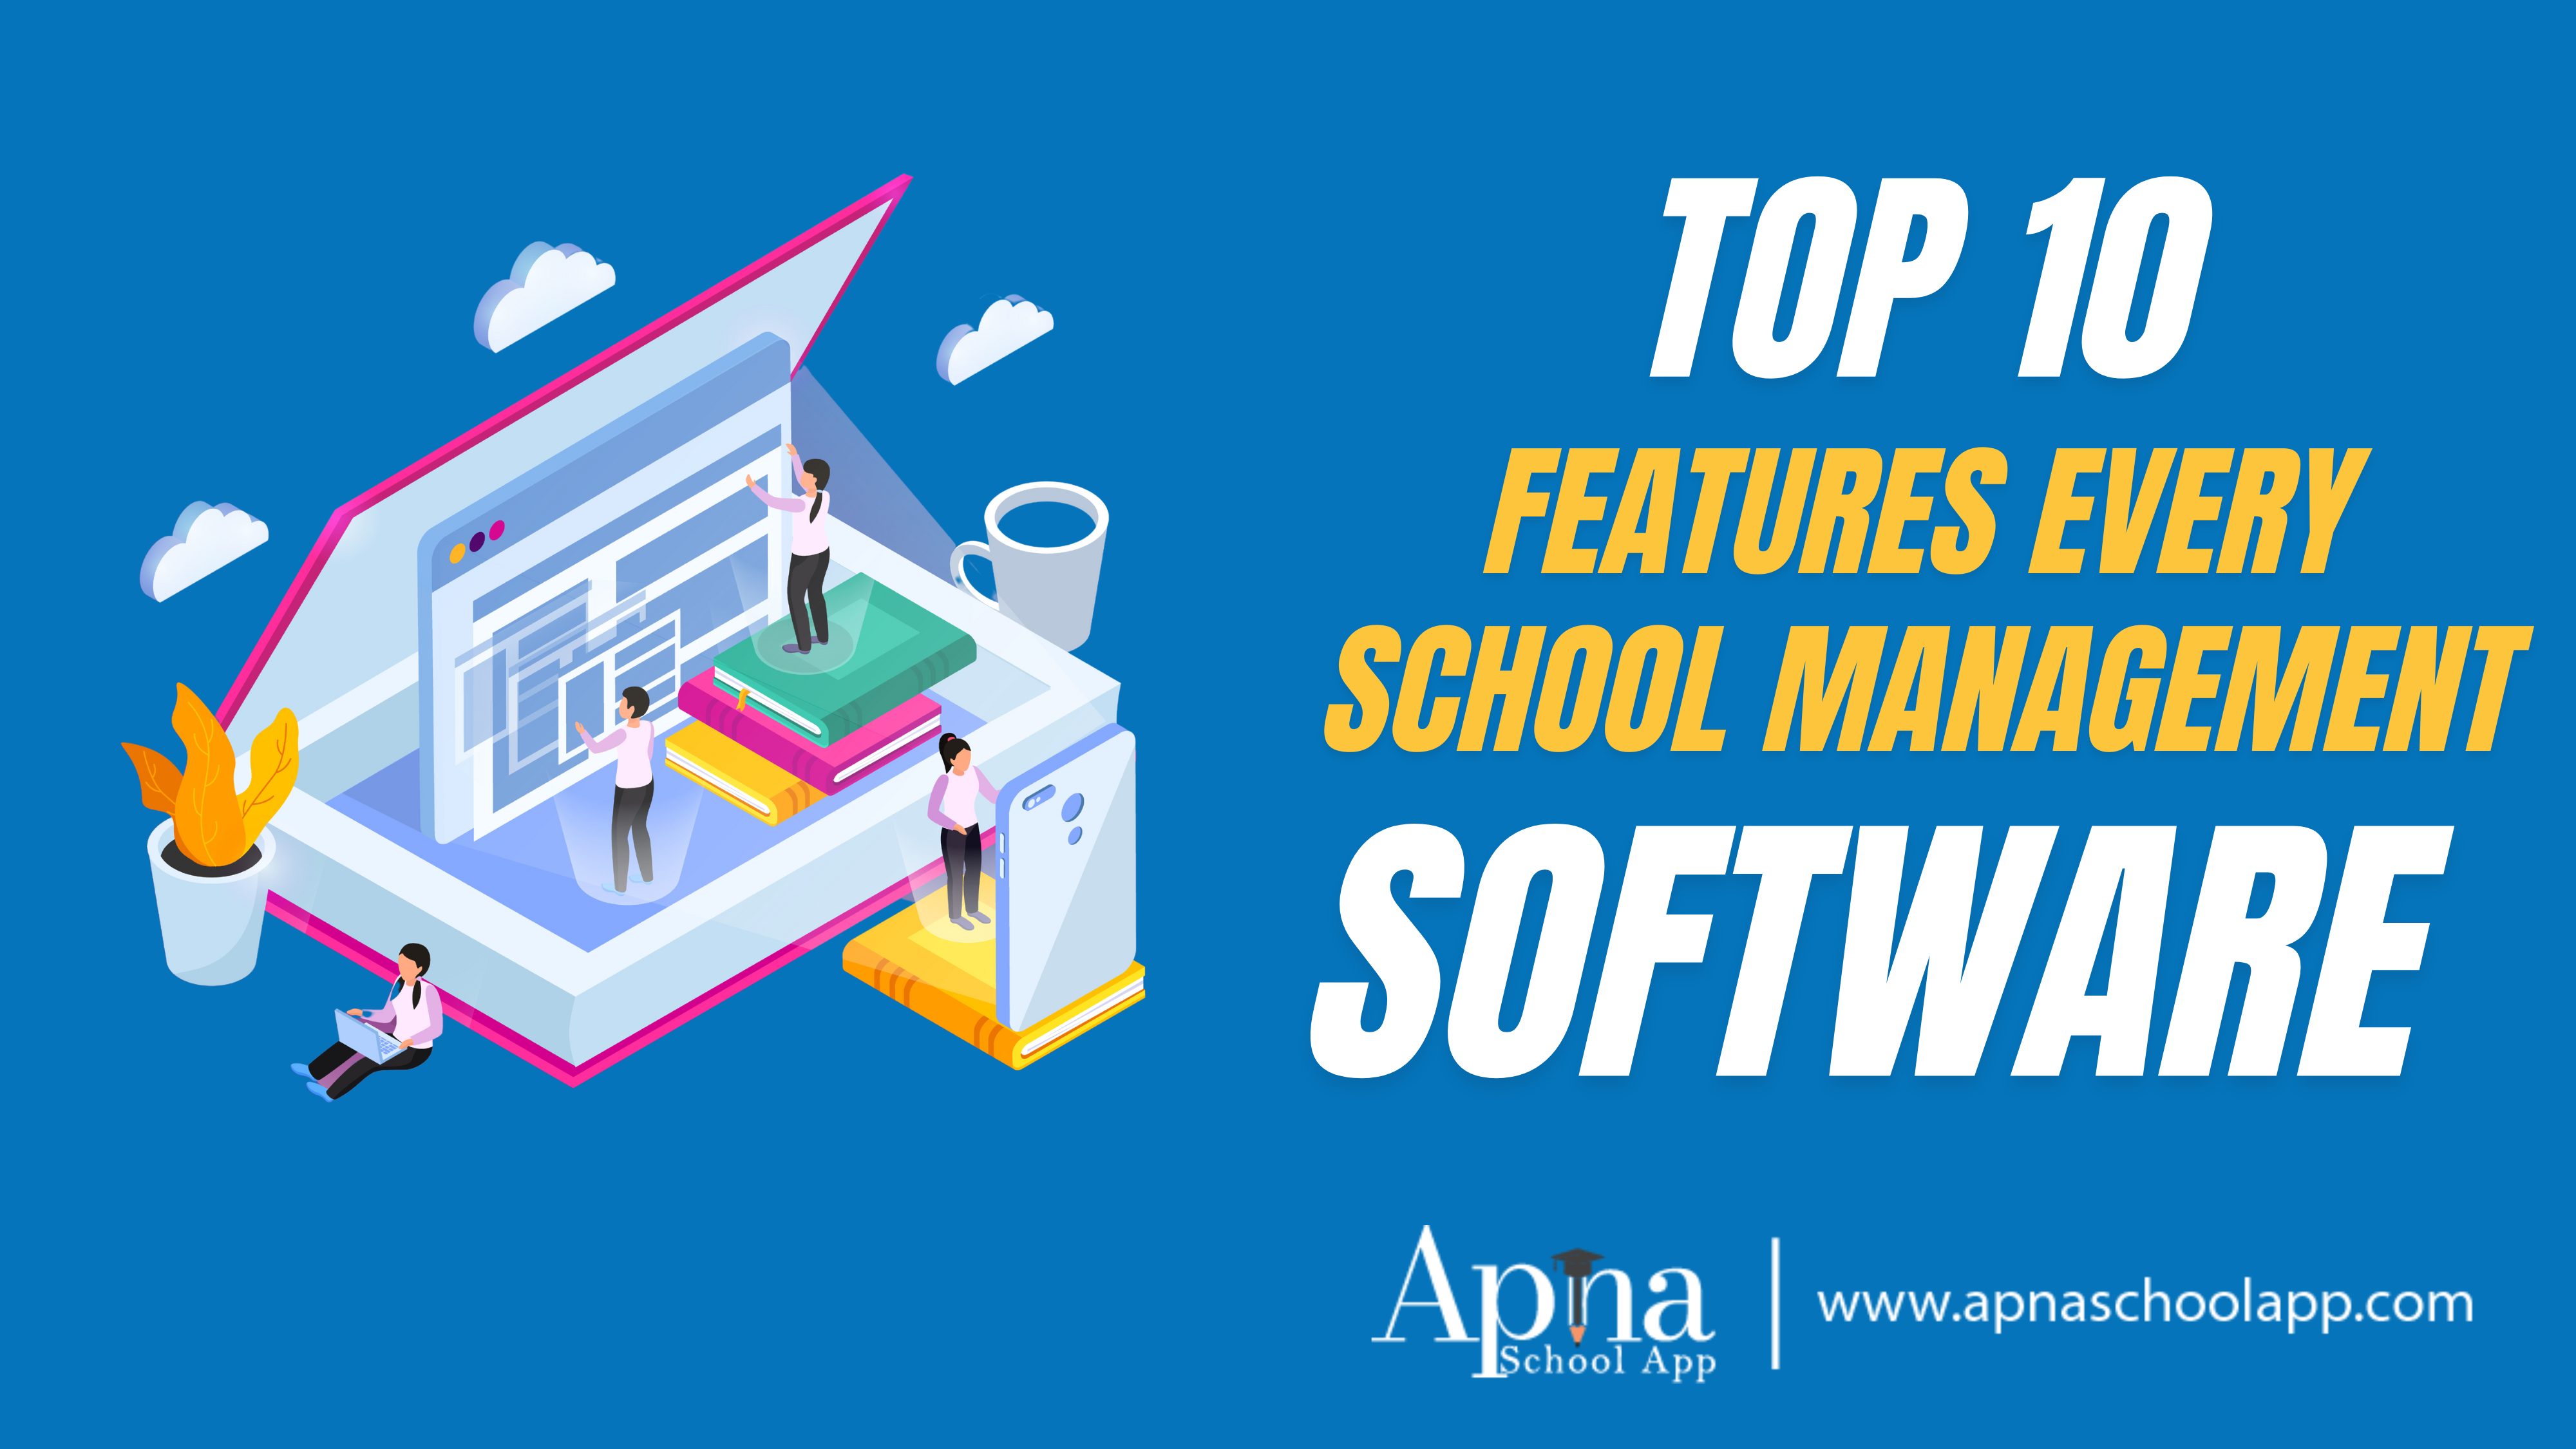 The Top 10 Features Every School Management Software Should Have